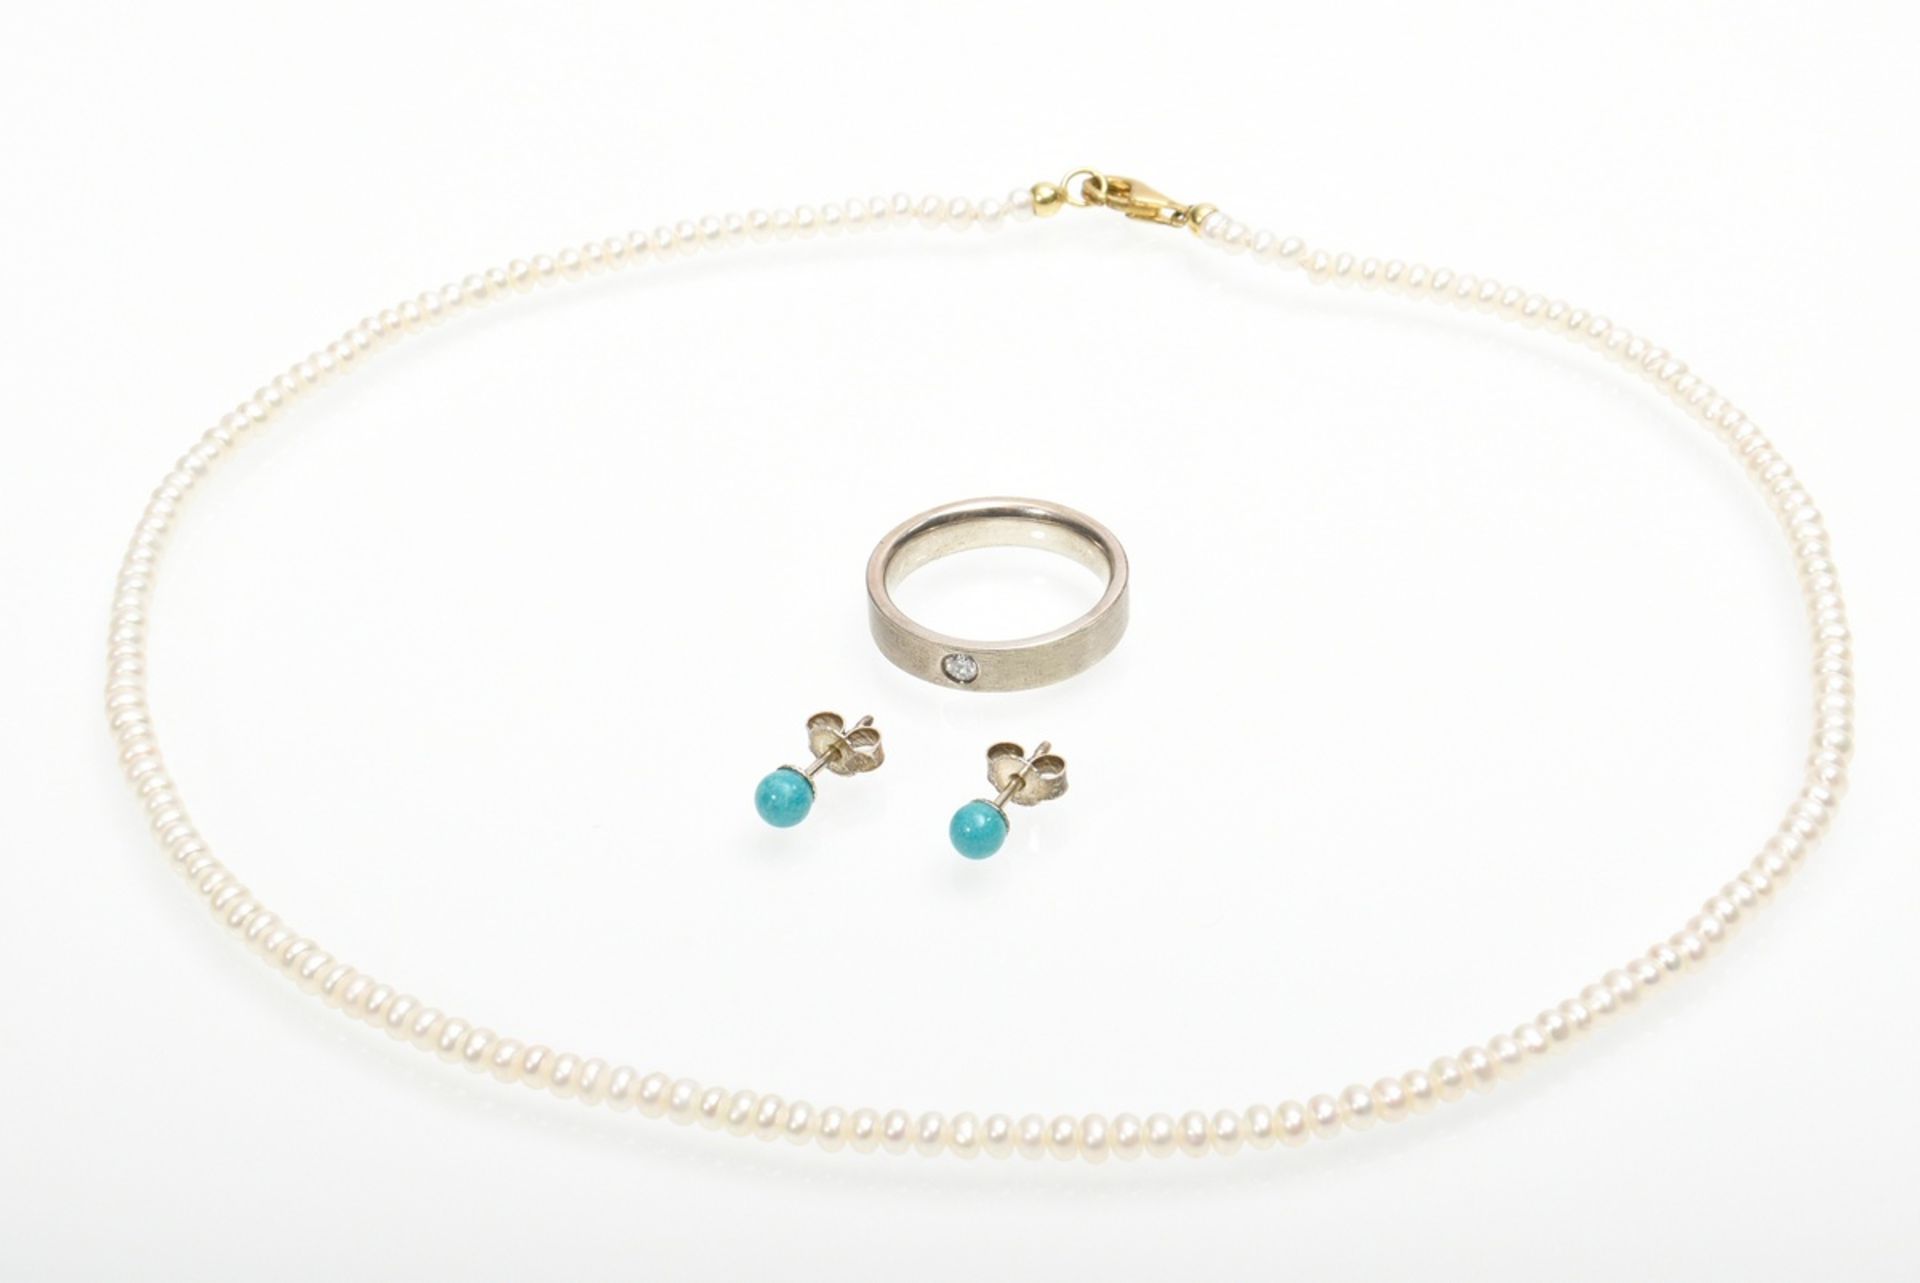 4 pieces of delicate diamond and pearl amazonite jewellery: 1x silver 925 ring with diamond (approx - Image 2 of 7